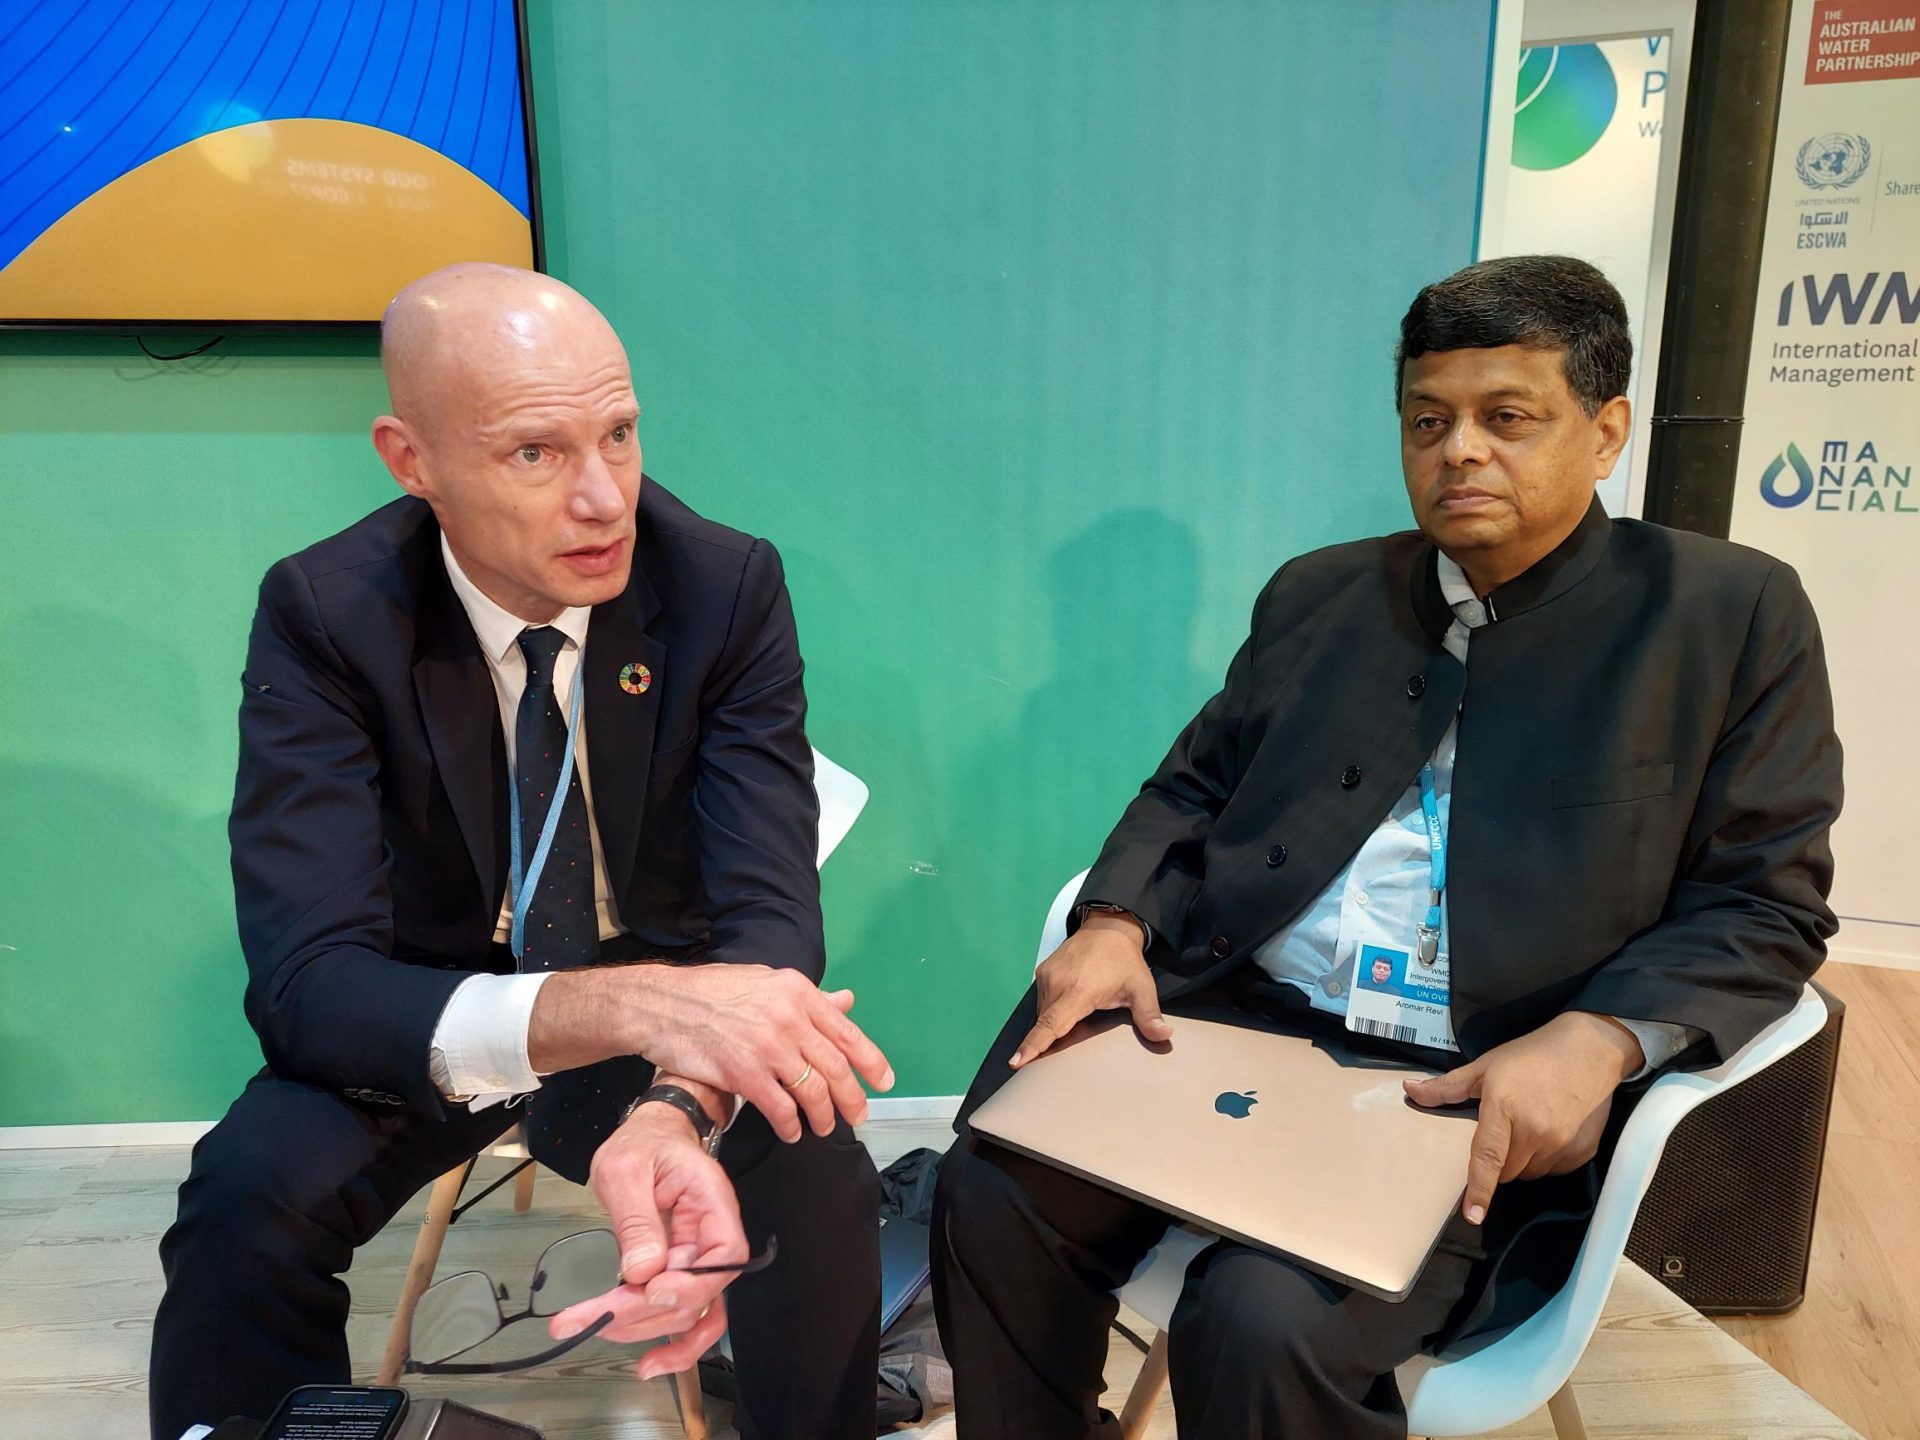 Henk Ovink and Aromar Revi at the press conference in the Water Pavilion at COP 27, November 2022